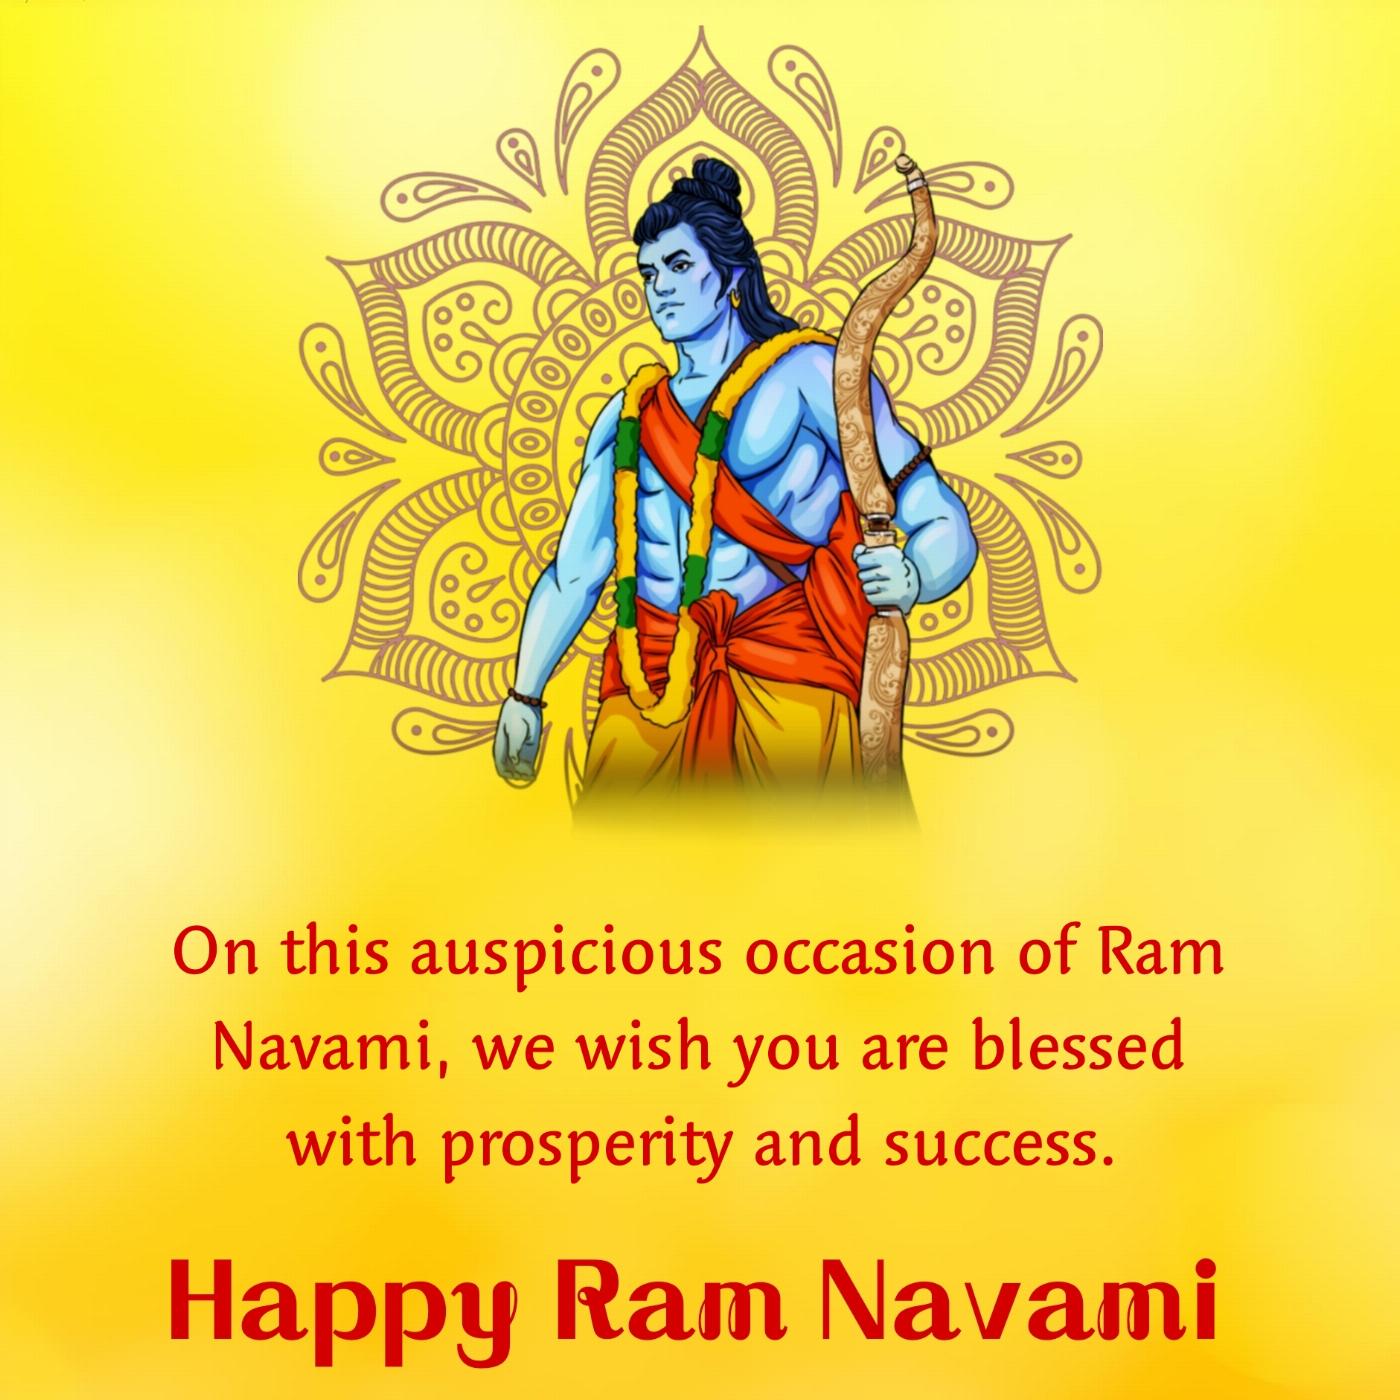 On this auspicious occasion of Ram Navami we wish you